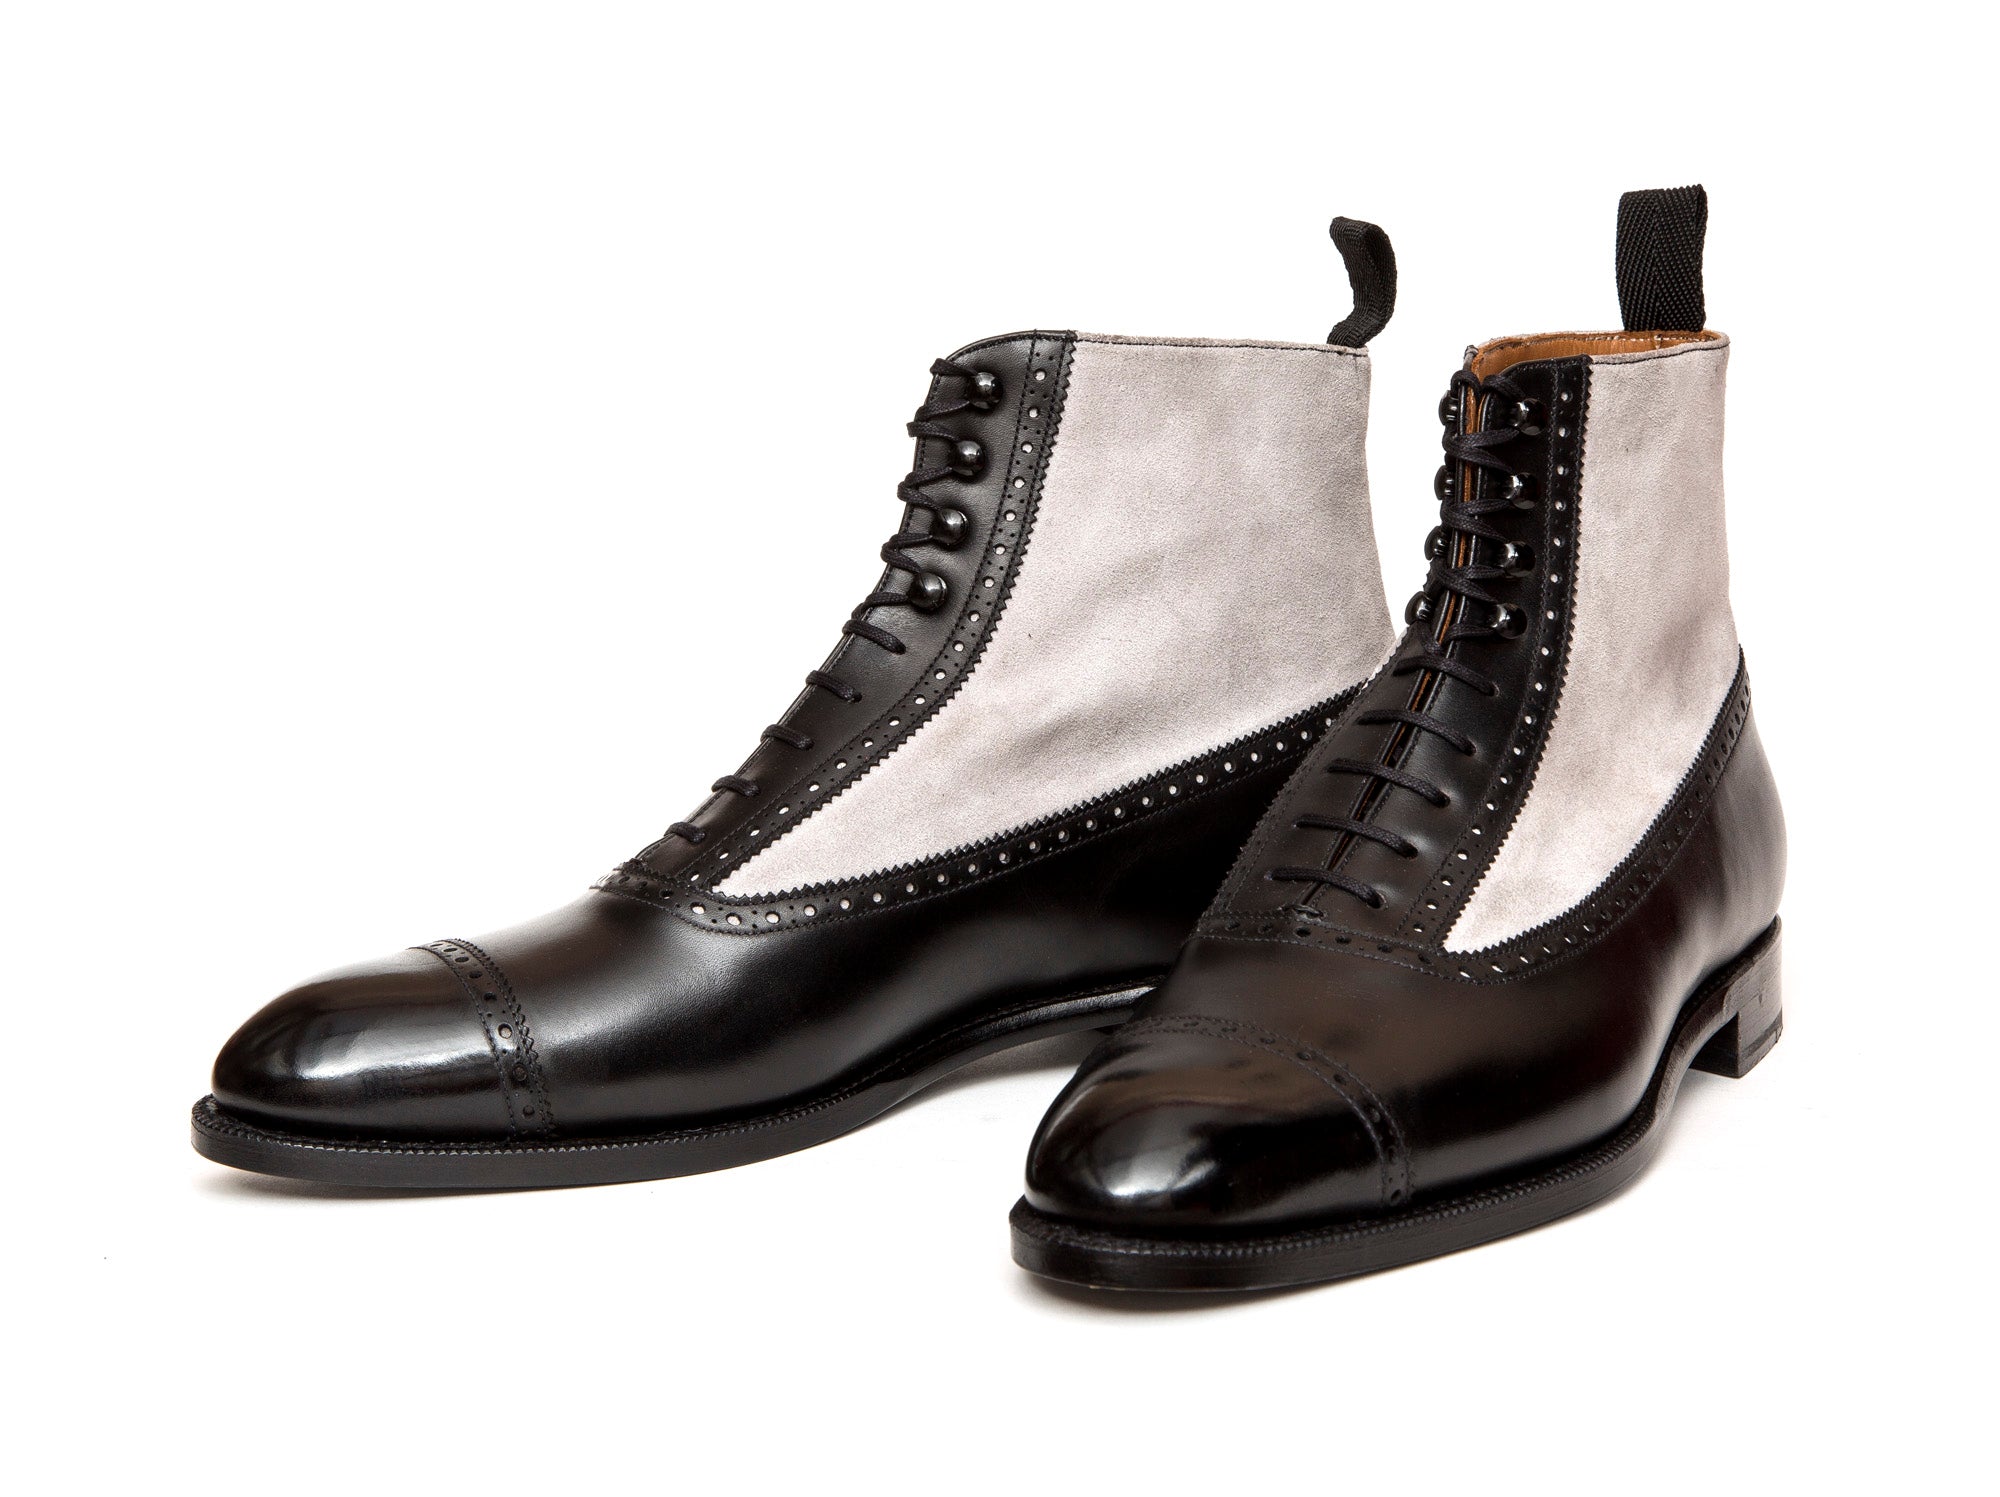 Tyler - MTO - Black Calf / Pearl Grey Suede - NGT Last - Single Leather Sole